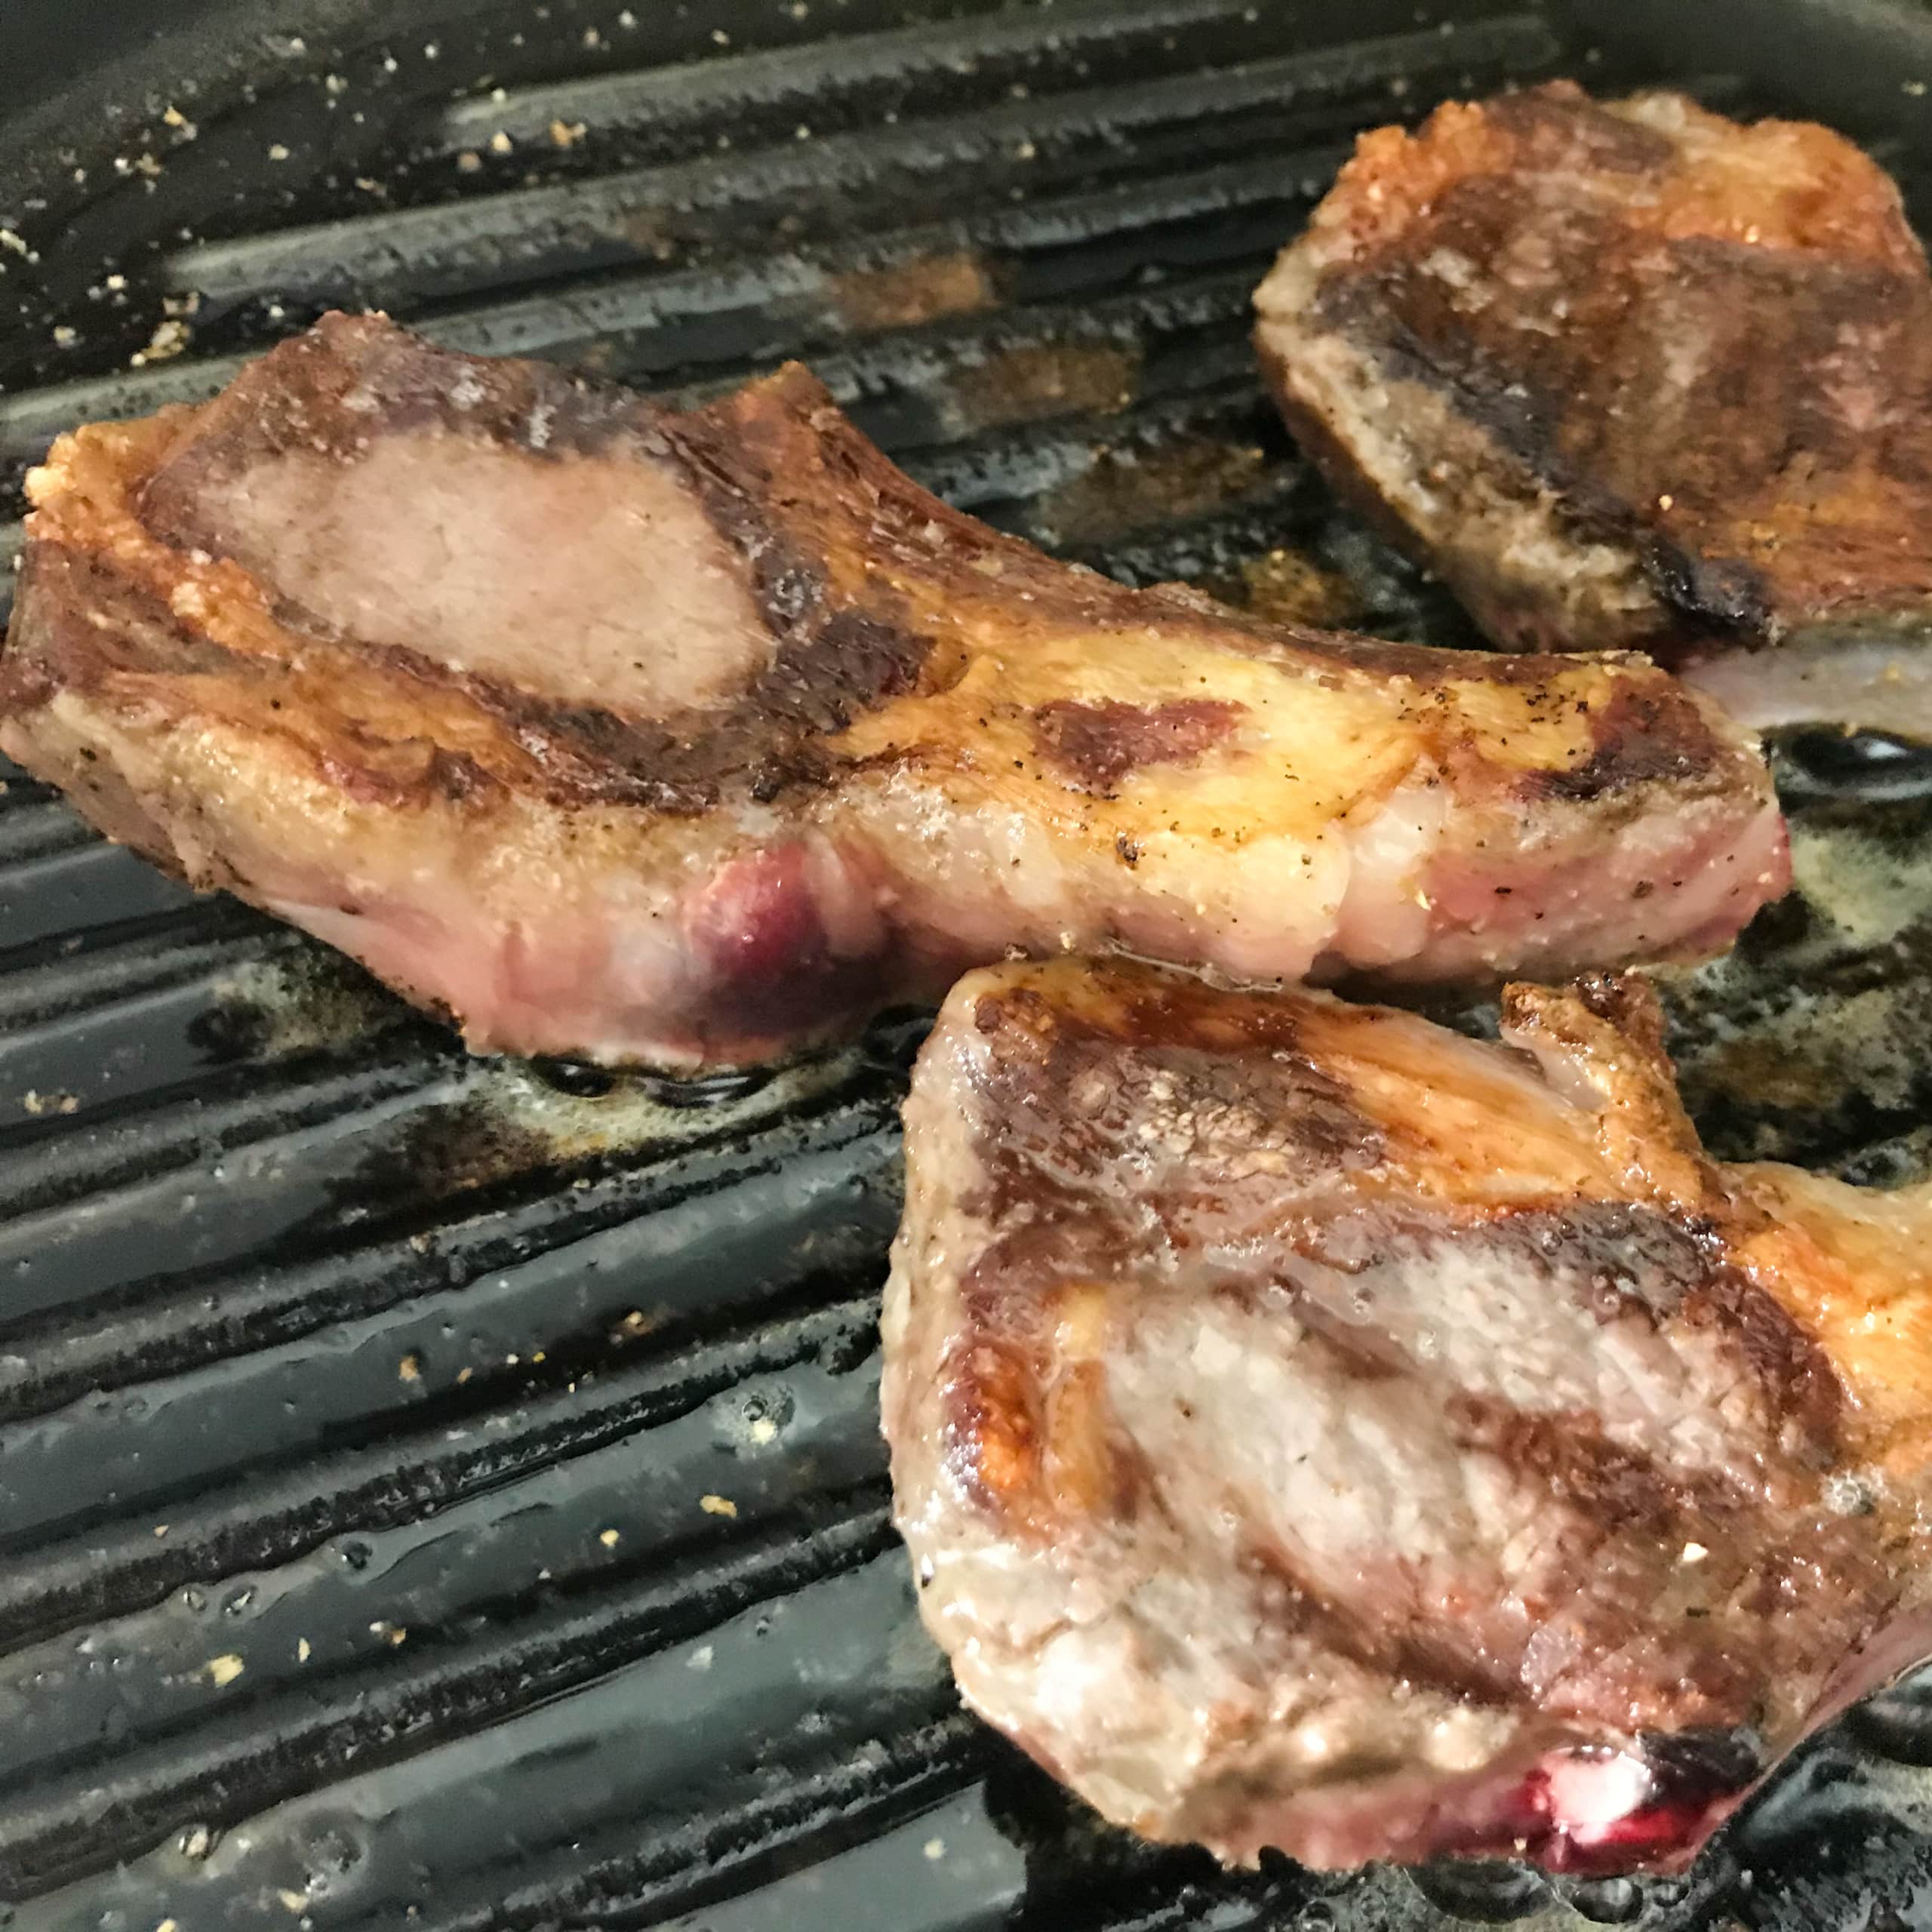 Grilled Baby Lamb Chops | My Curated Tastes